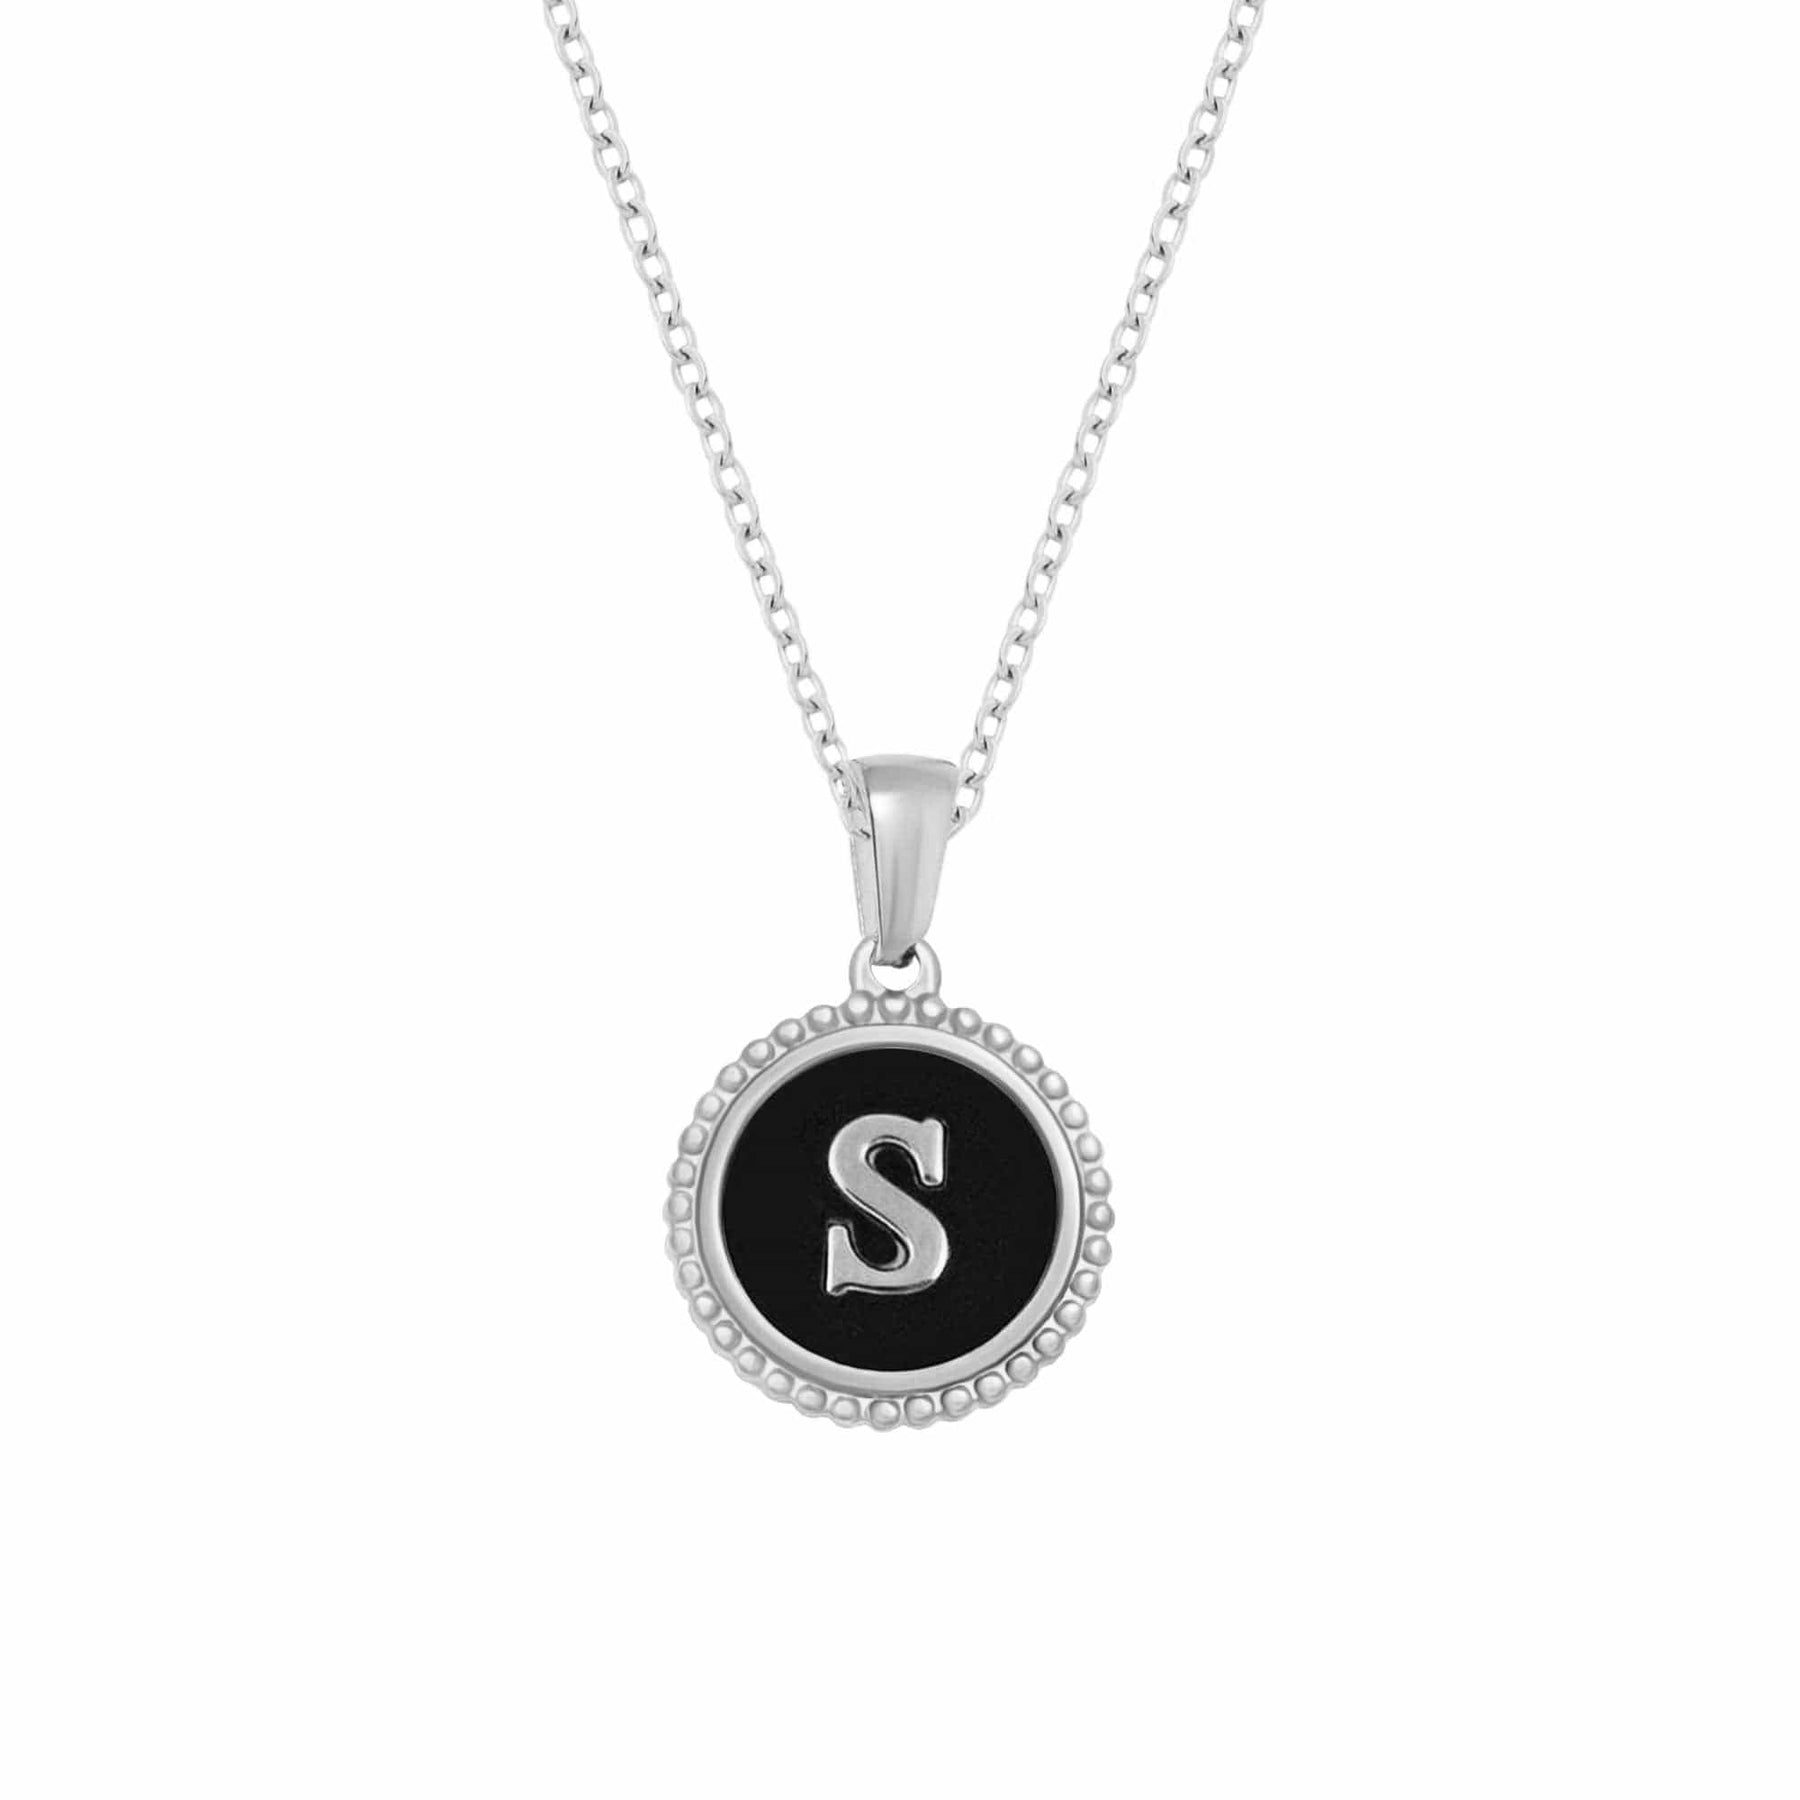 BohoMoon Stainless Steel Noire Initial Necklace Silver / A